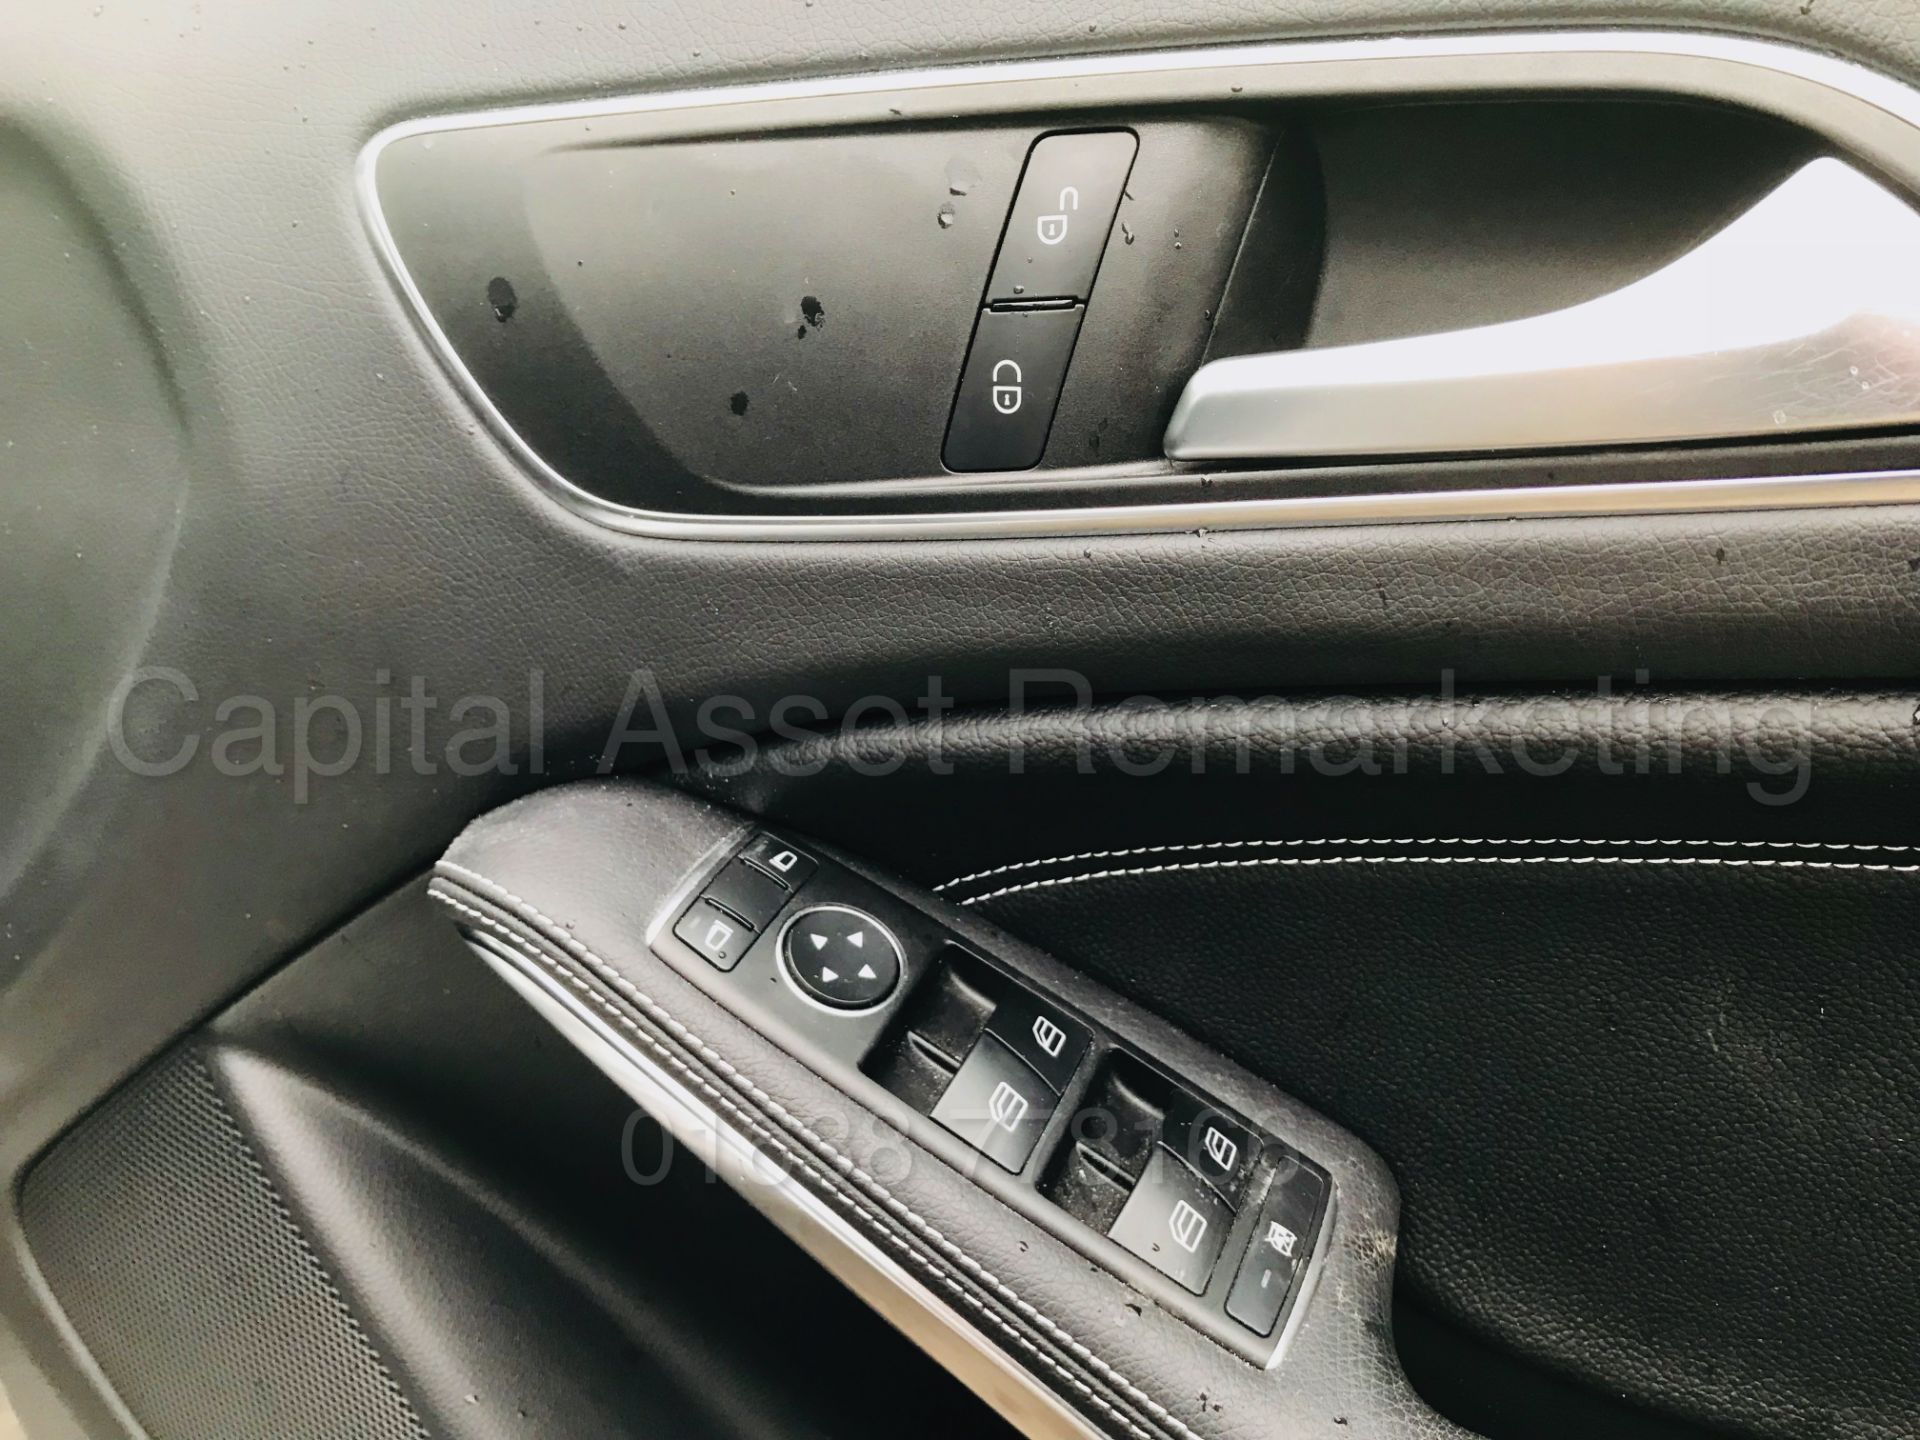 MERCEDES-BENZ A180D 'SPORT' (2017 MODEL) '7G TRONIC AUTO - LEATHER - SAT NAV' (1 OWNER FROM NEW) - Image 36 of 41